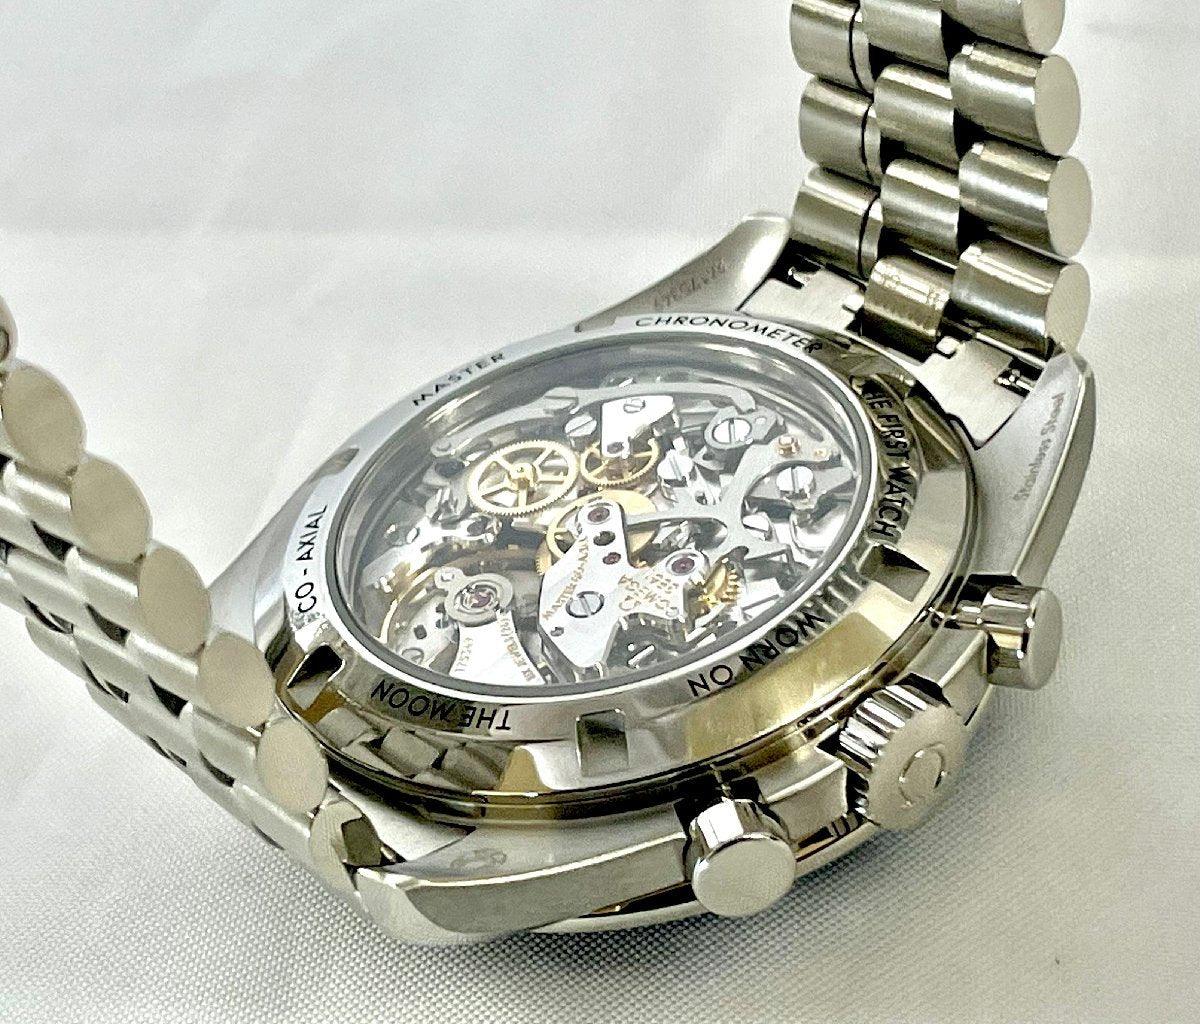 Omega Speed master 310.30.42.50.01.002 Speedmaster Moonwatch Pro Co-Axial Pawnshop Union Matoba Store Used S item - Murphy Johnson Watches Co.